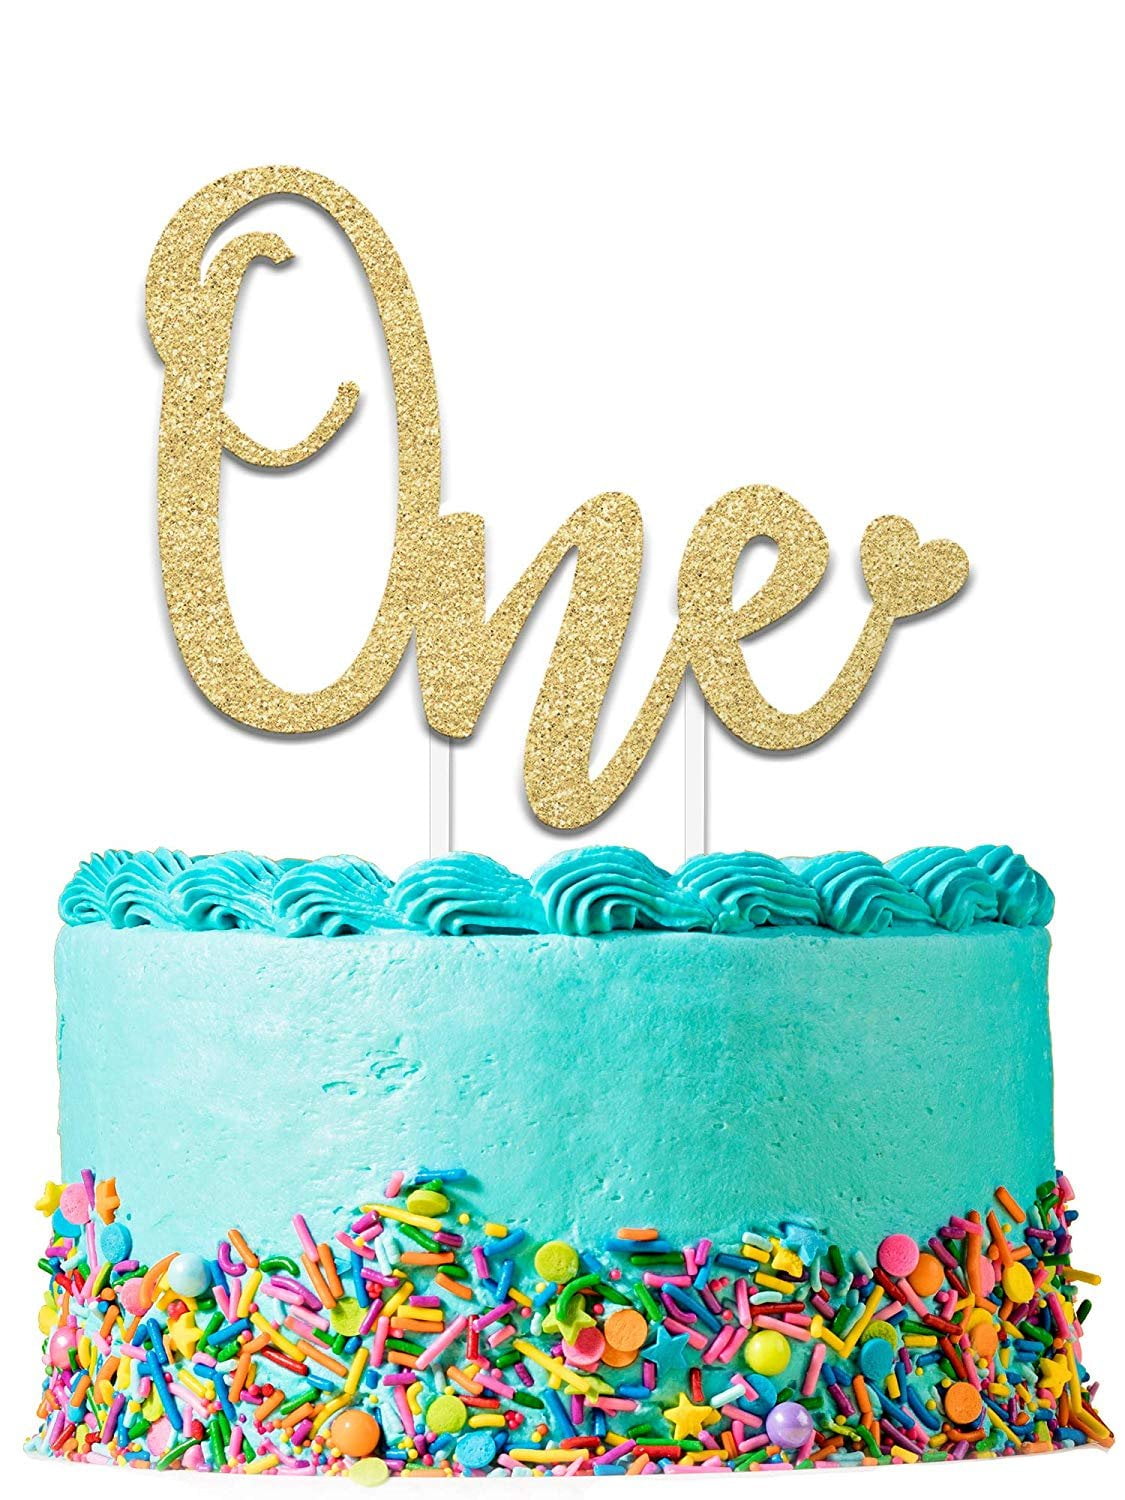 6.25 x 4.25 First Bday Topper w/ Premium Double Sided Gold Glitter Card Stock Paper 1st Birthday Cake Topper Decoration ONE Exclusive Happy Birthday Accessory For Boys & Girls 